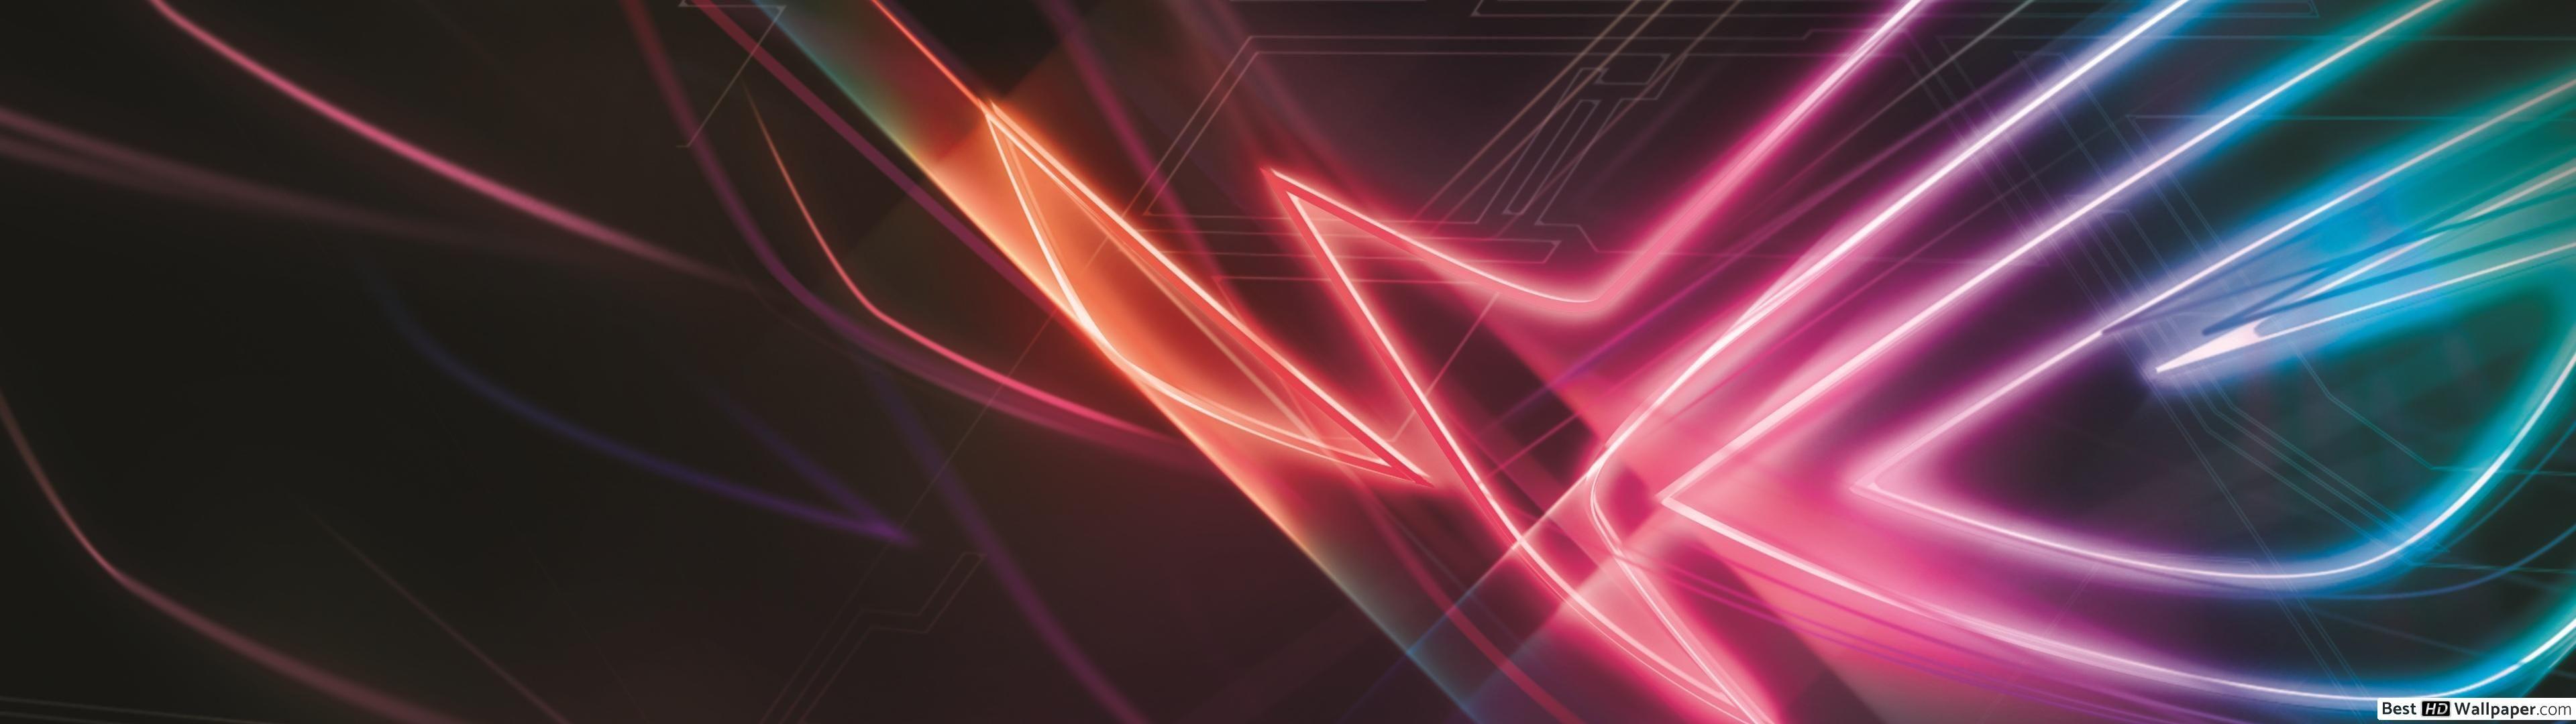 3840 X 1080 Asus Wallpapers Top Free 3840 X 1080 Asus Backgrounds